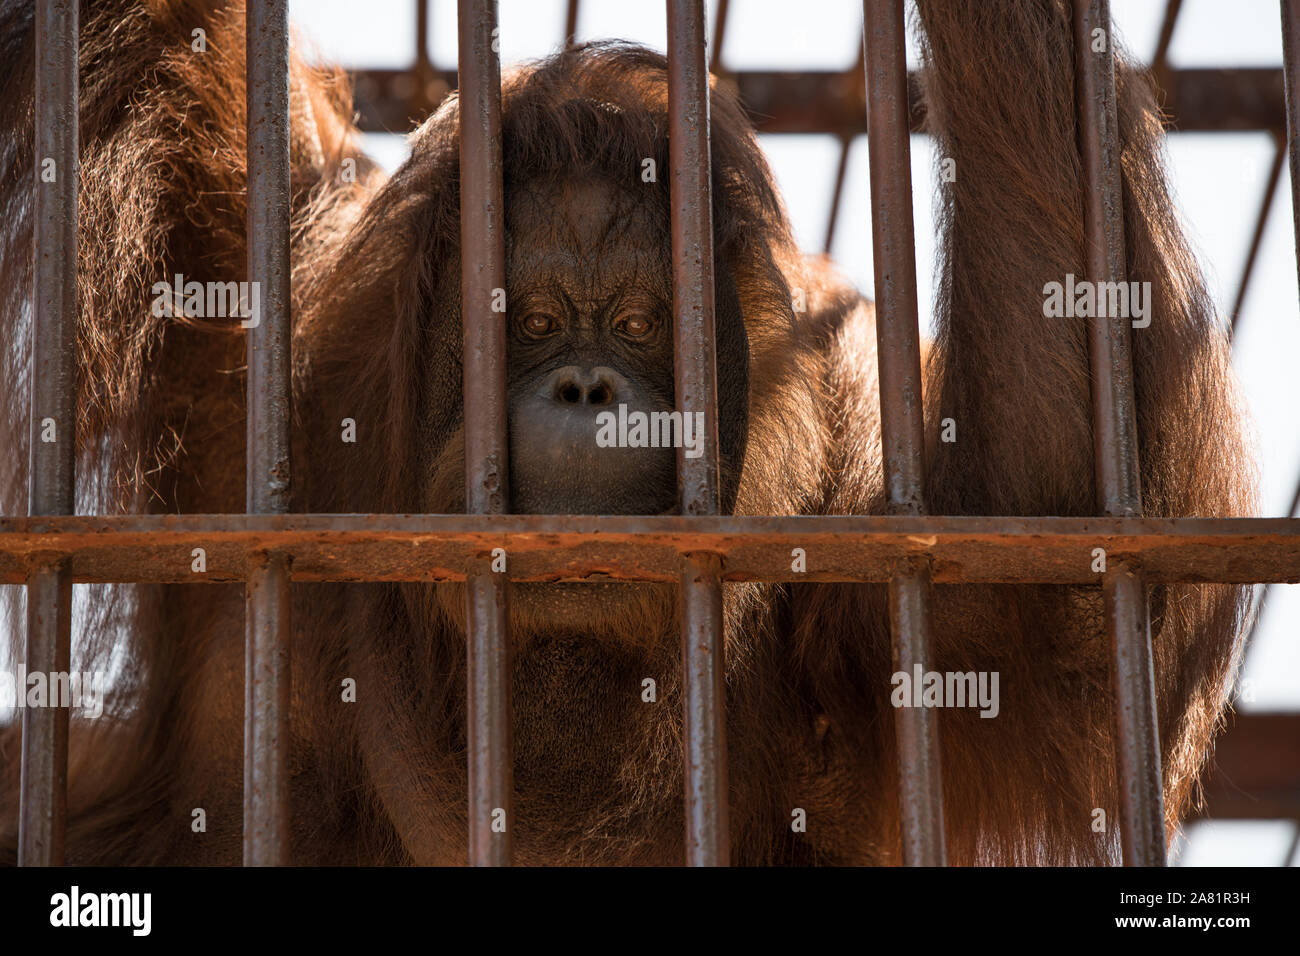 Very sad look and expression, on the lonely monkey face, ho is keep in cage, depression, sadness, it is his reality, and he can only think about his Stock Photo